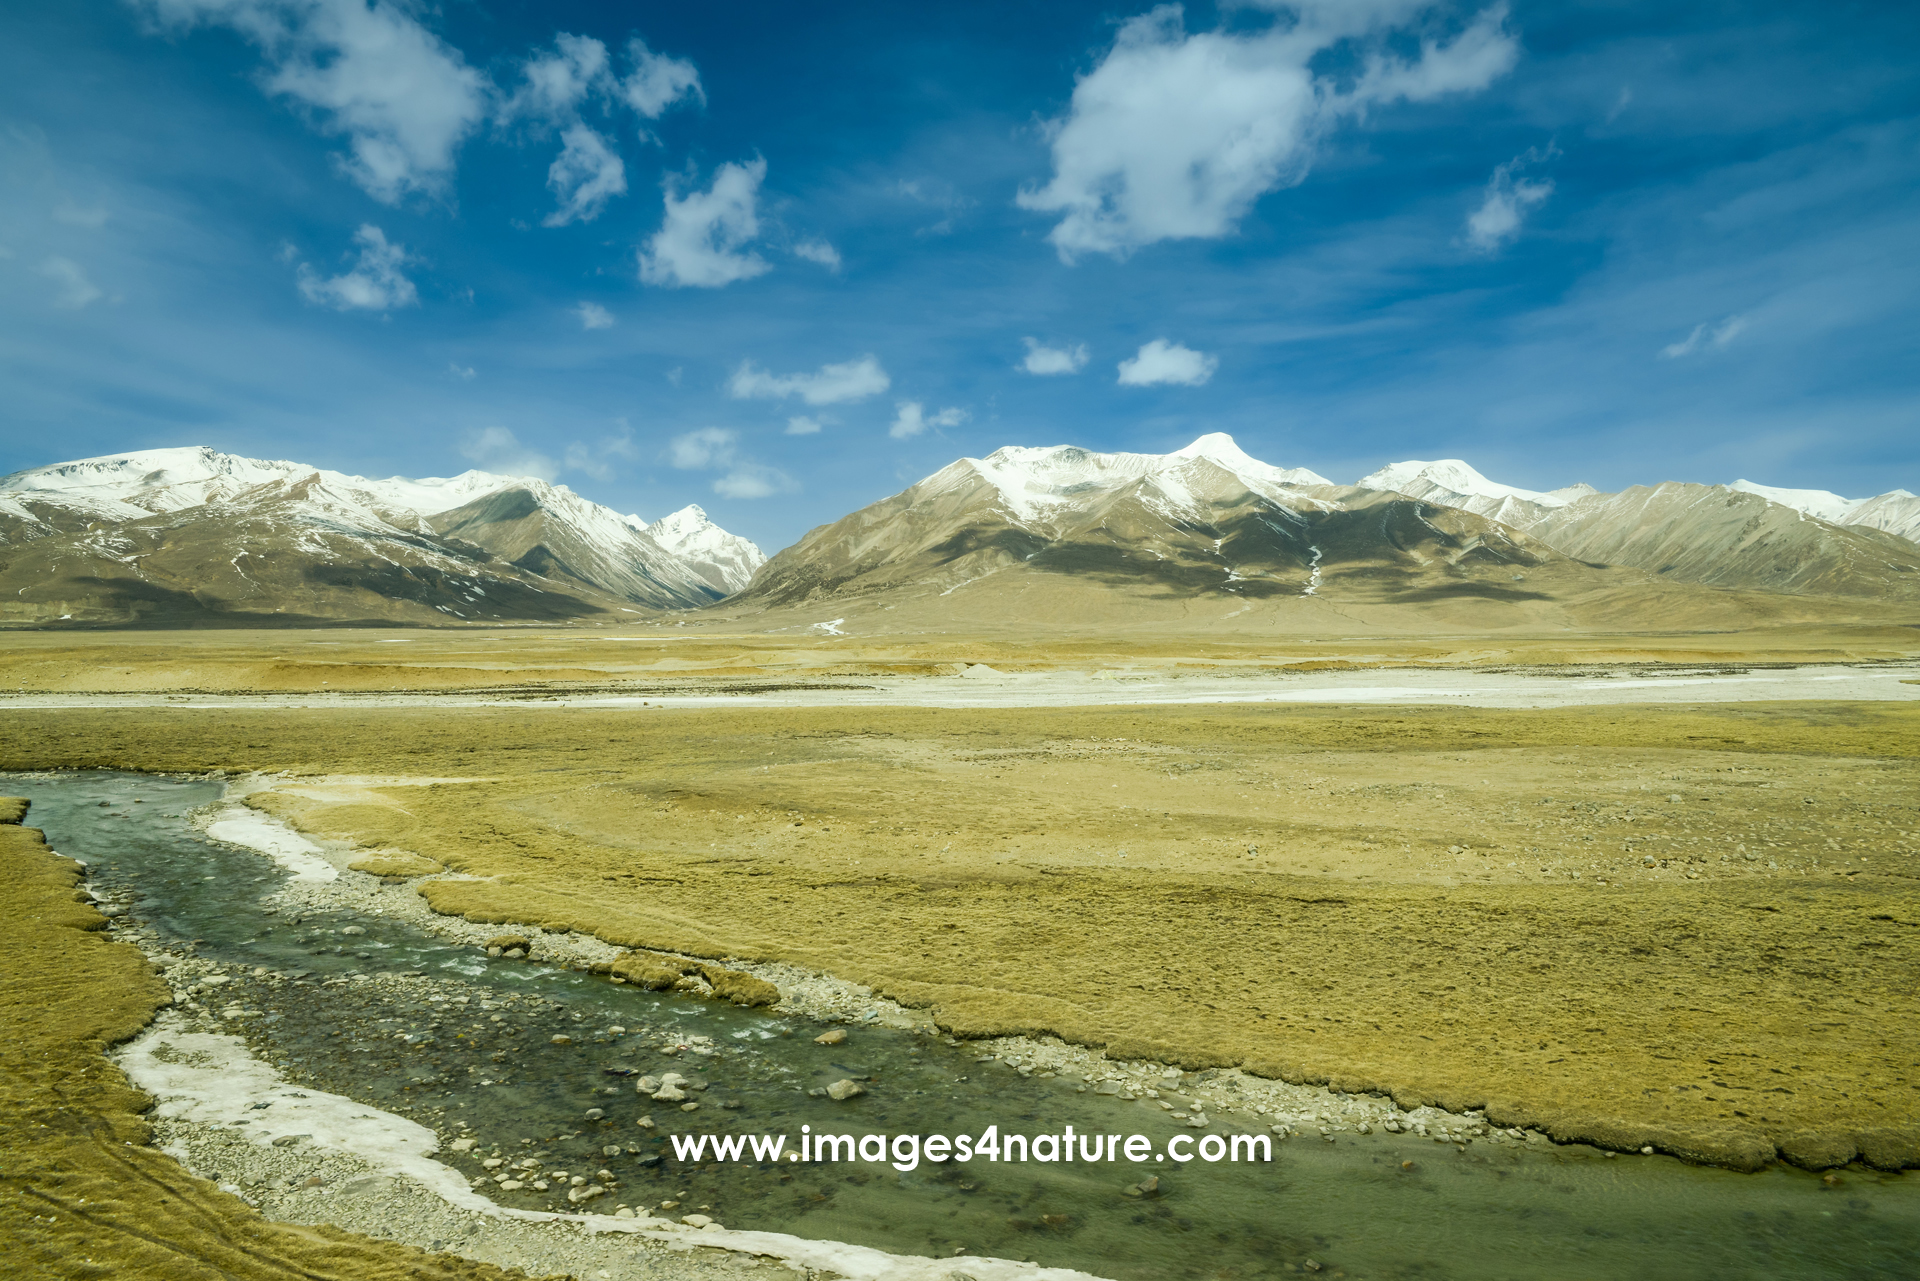 Qinghai-Tibet plateau landscape in winter with snow-covered mountain peaks and stream flowing through grasslands